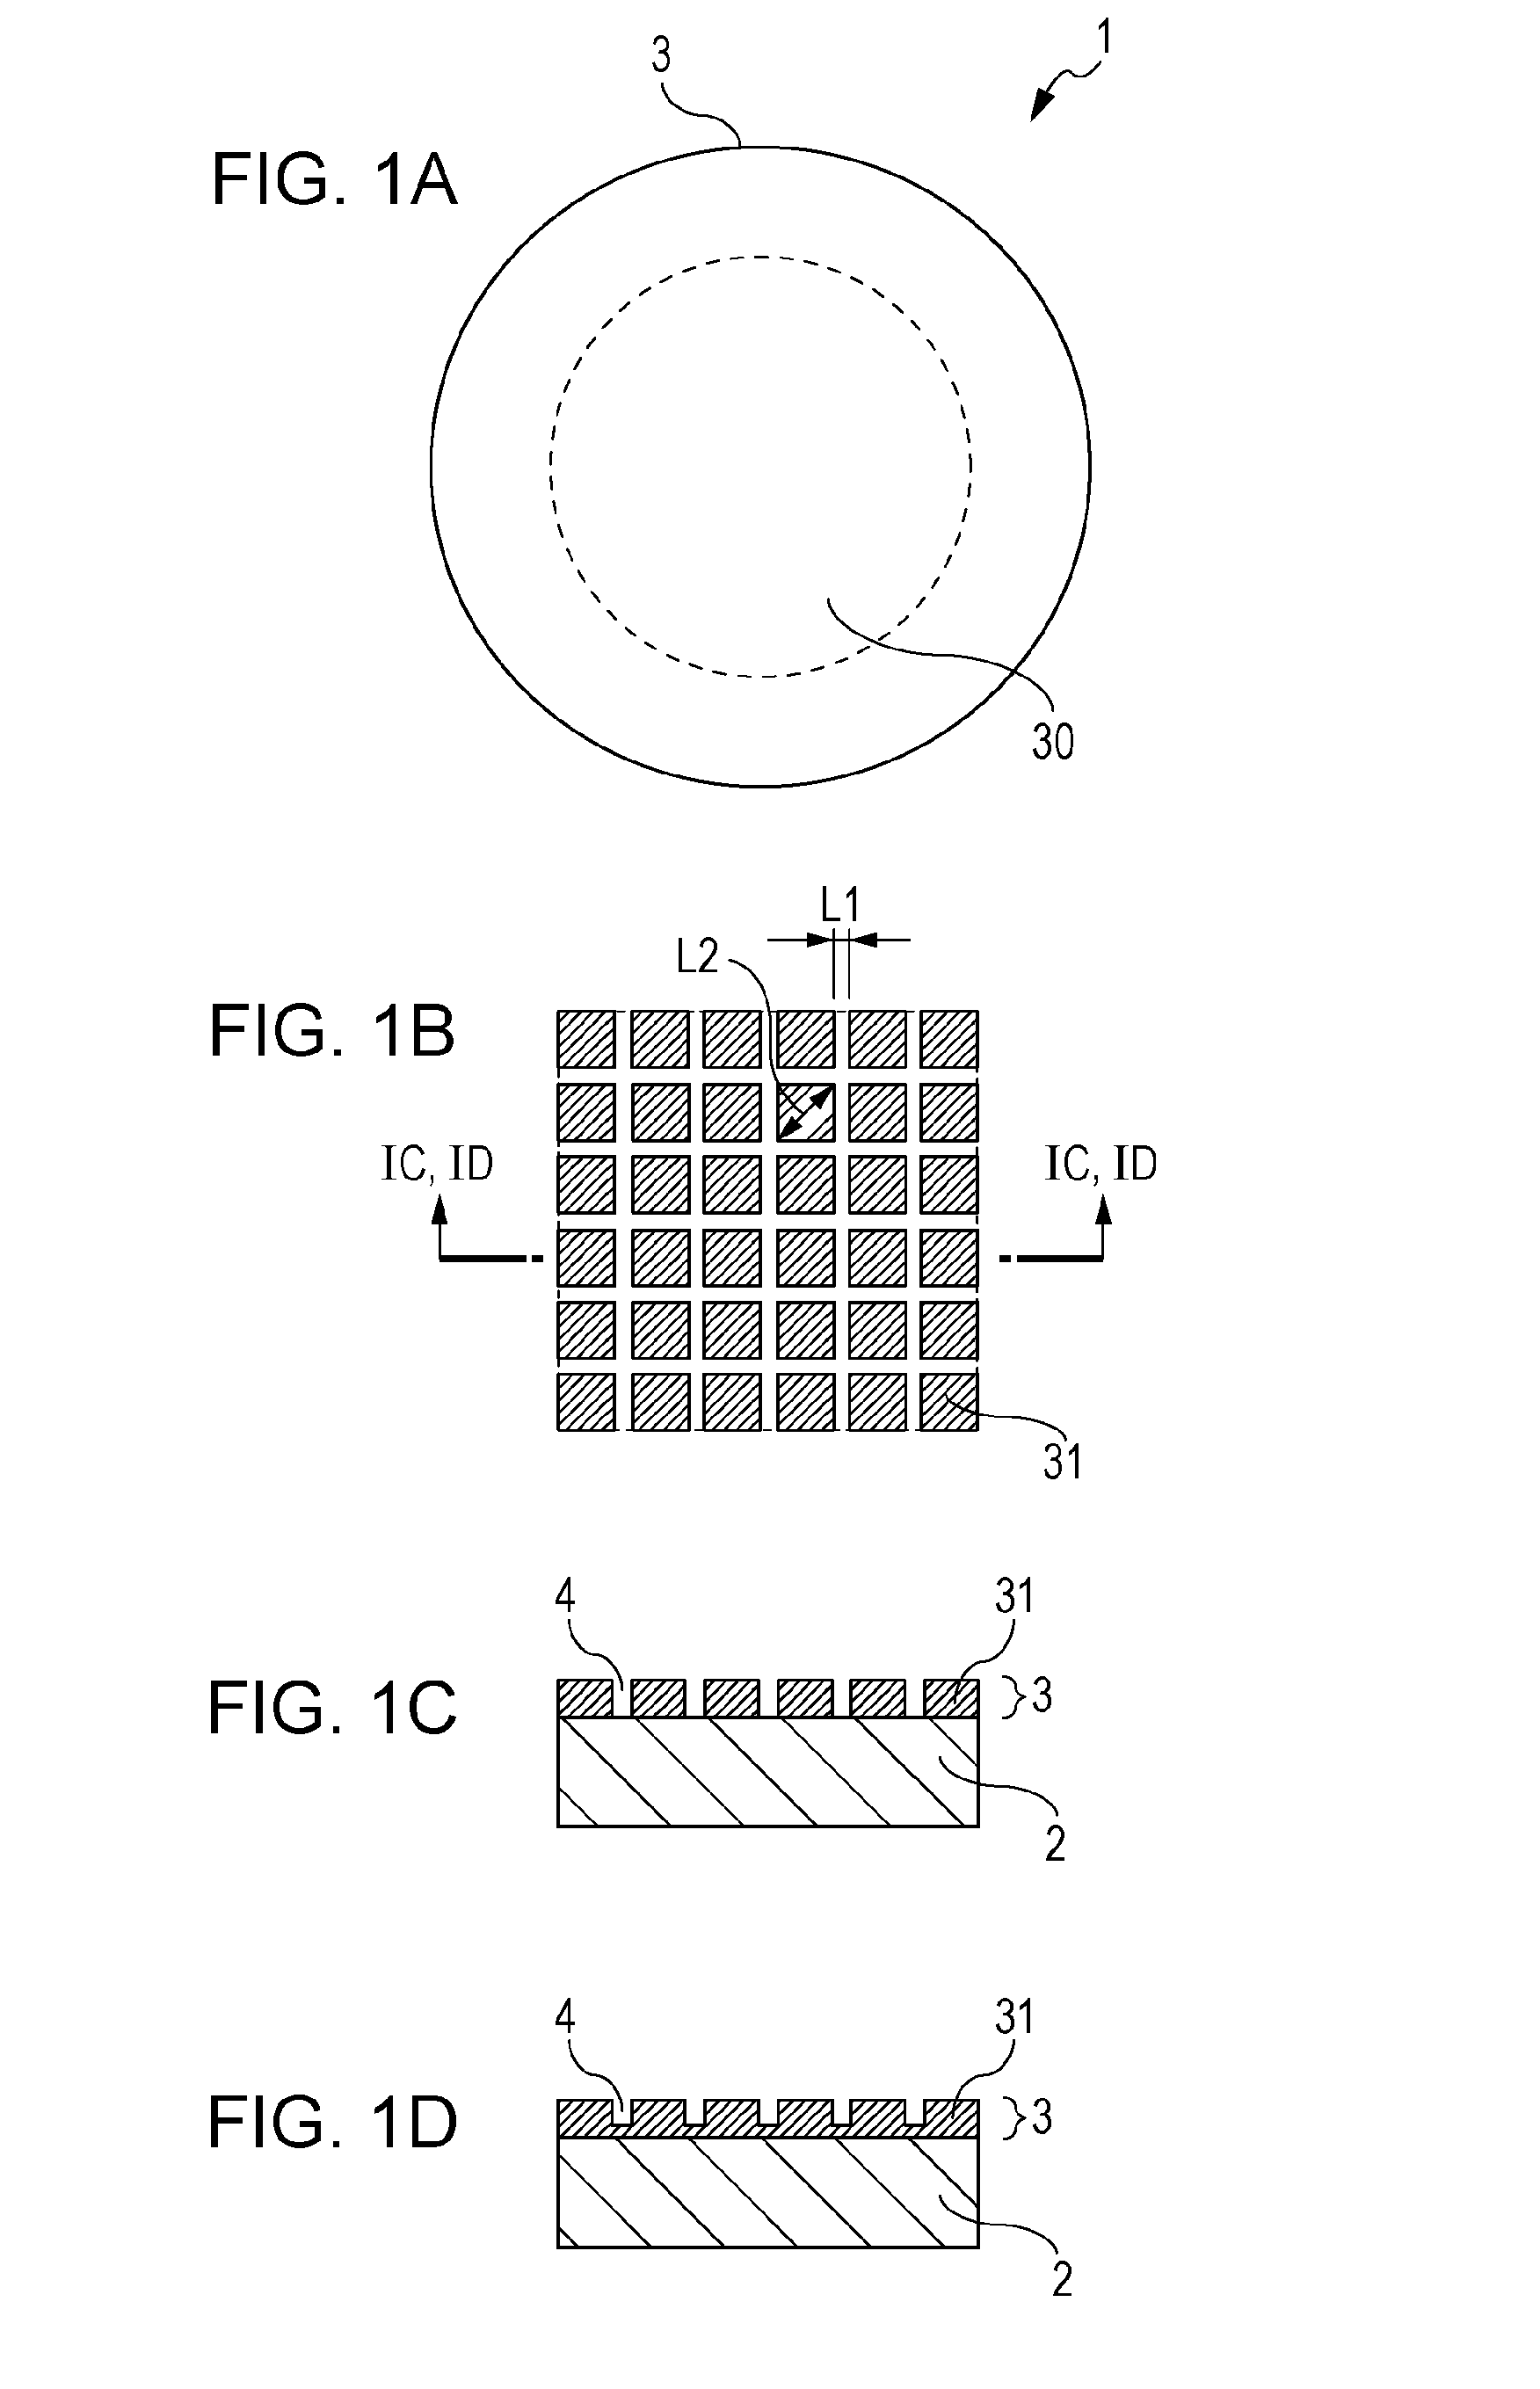 Target structure and radiation generating apparatus